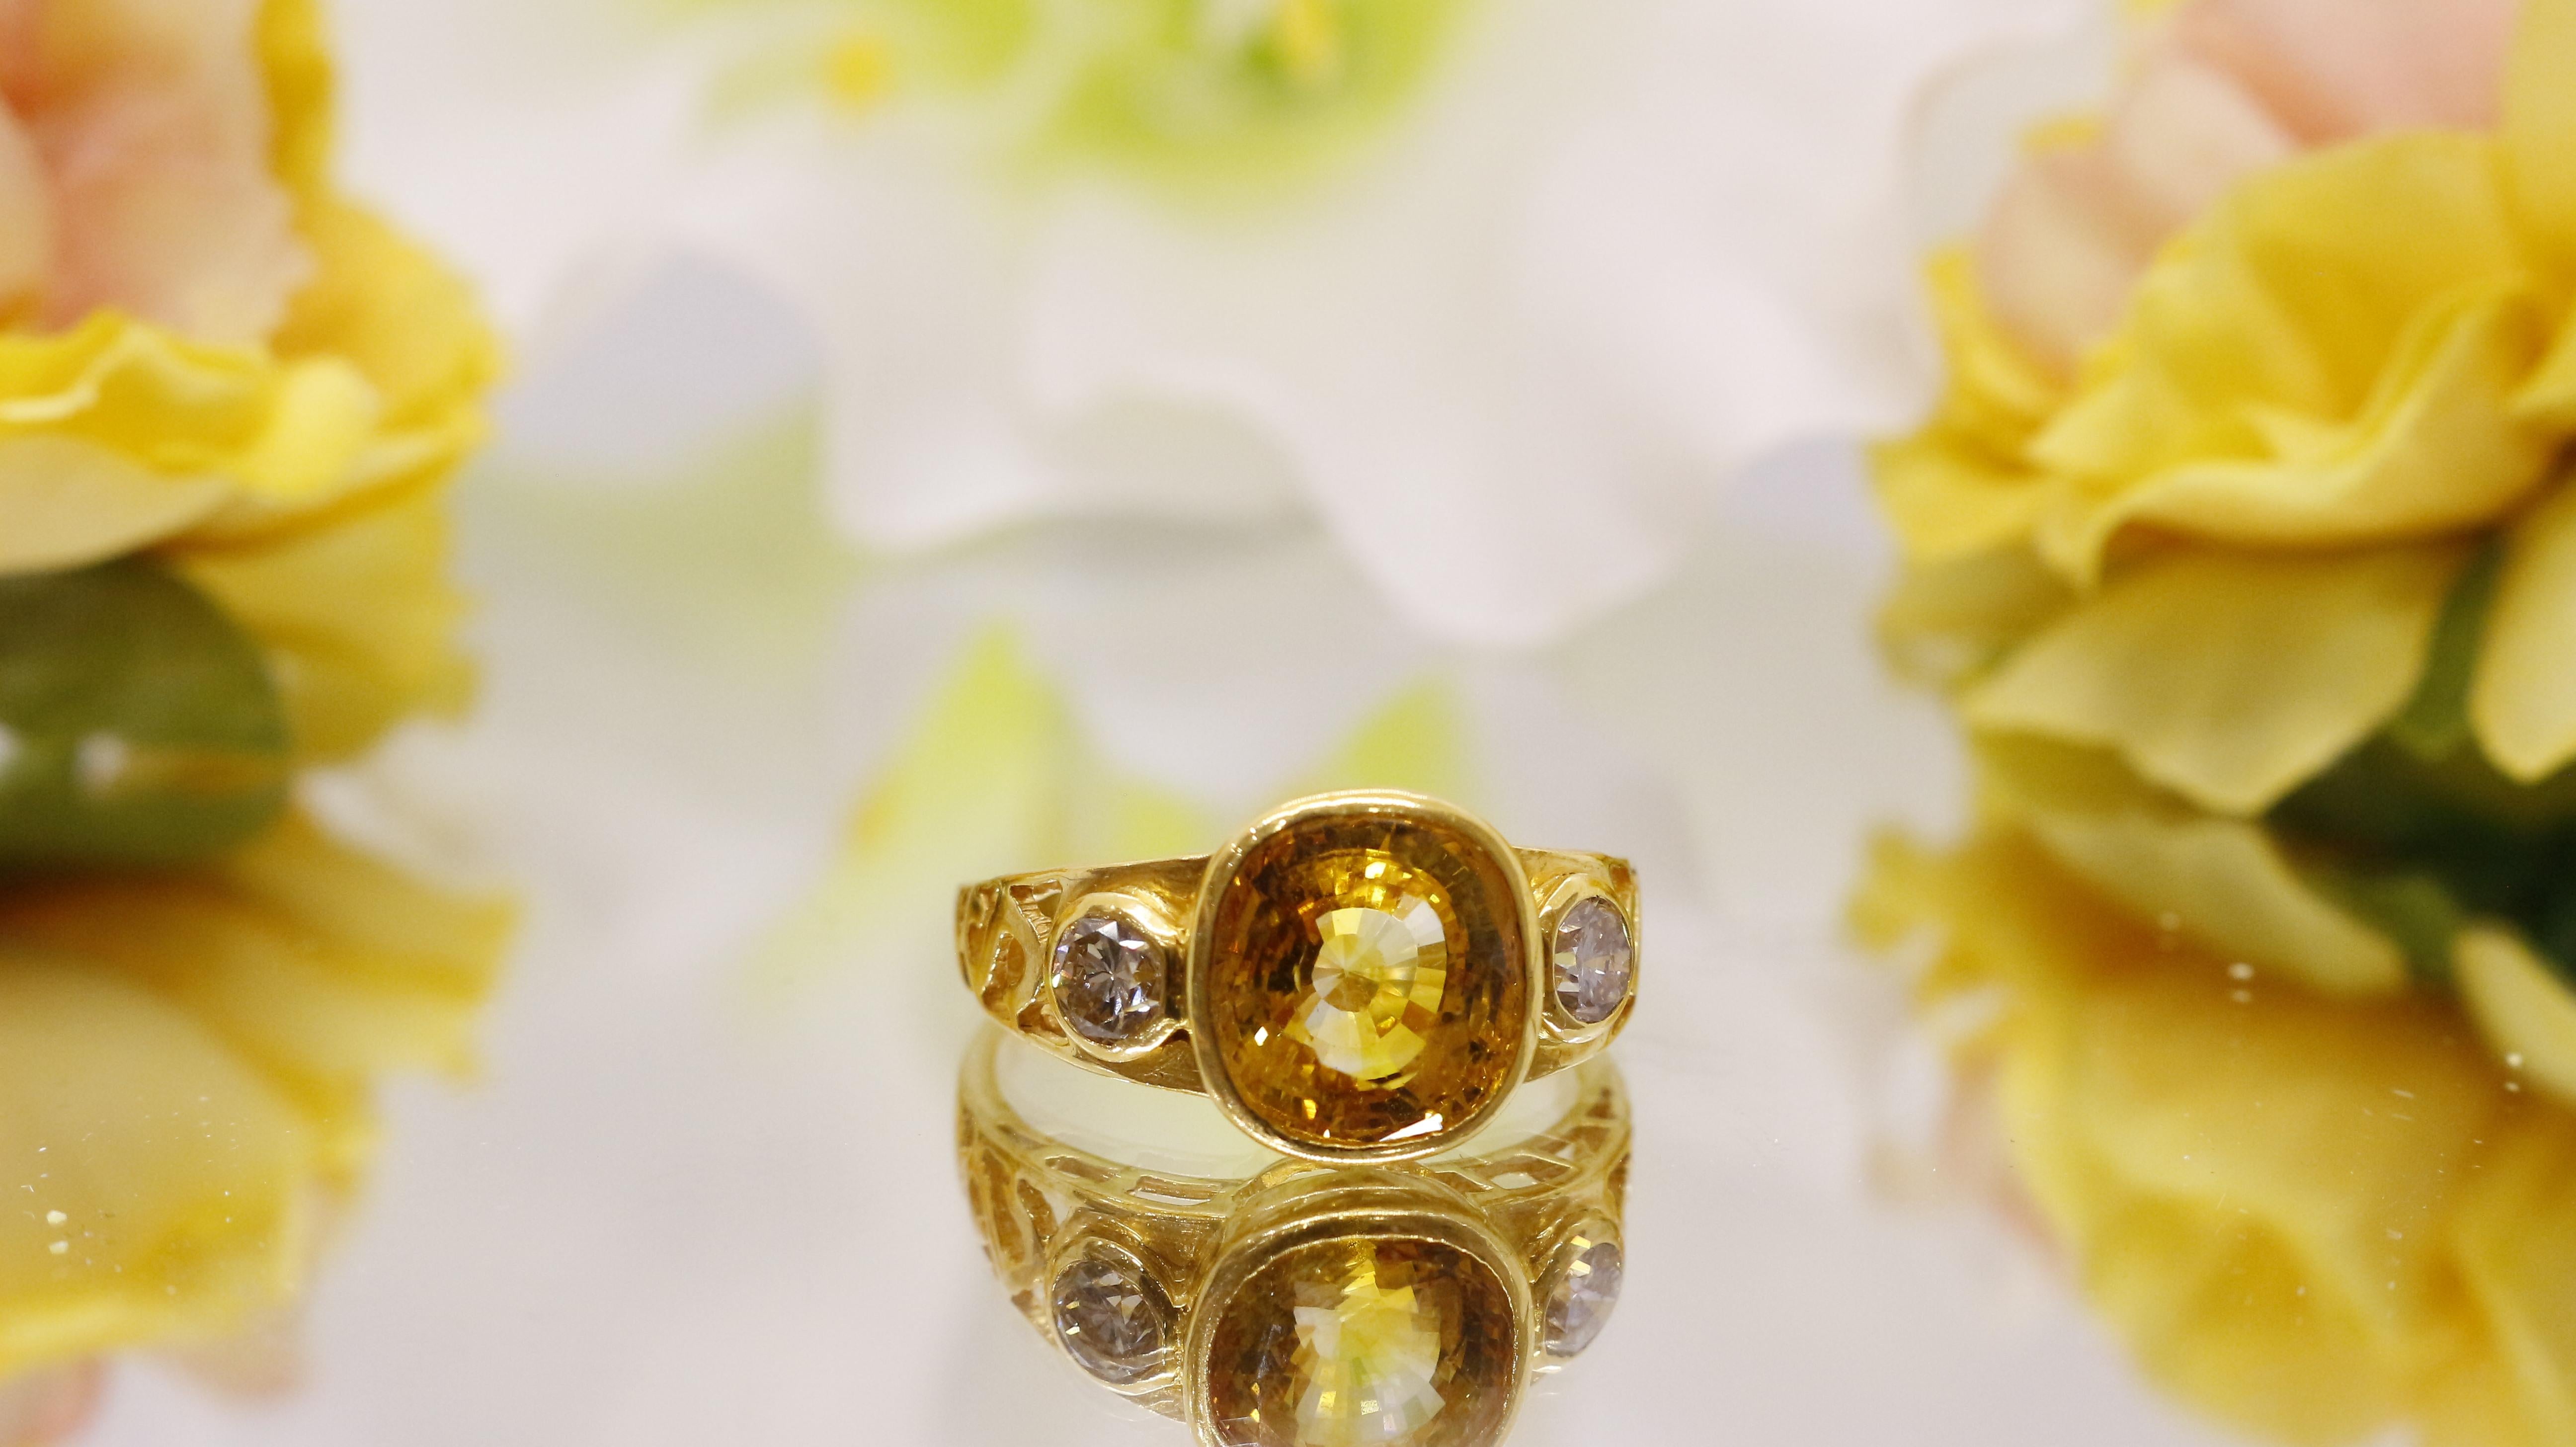 Certified handmade 5CT Yellow Sapphire ring  Gift for her  18kt Simple gold ring  Stackable ring  Bezel set ring  Gemstone ring 

◆Solid 18kt Gold (shown in picture)

◆sapphire Weight: 5 CT

◆Diamond Carat: 0.24 CT approx

◆Diamond Shape: Round